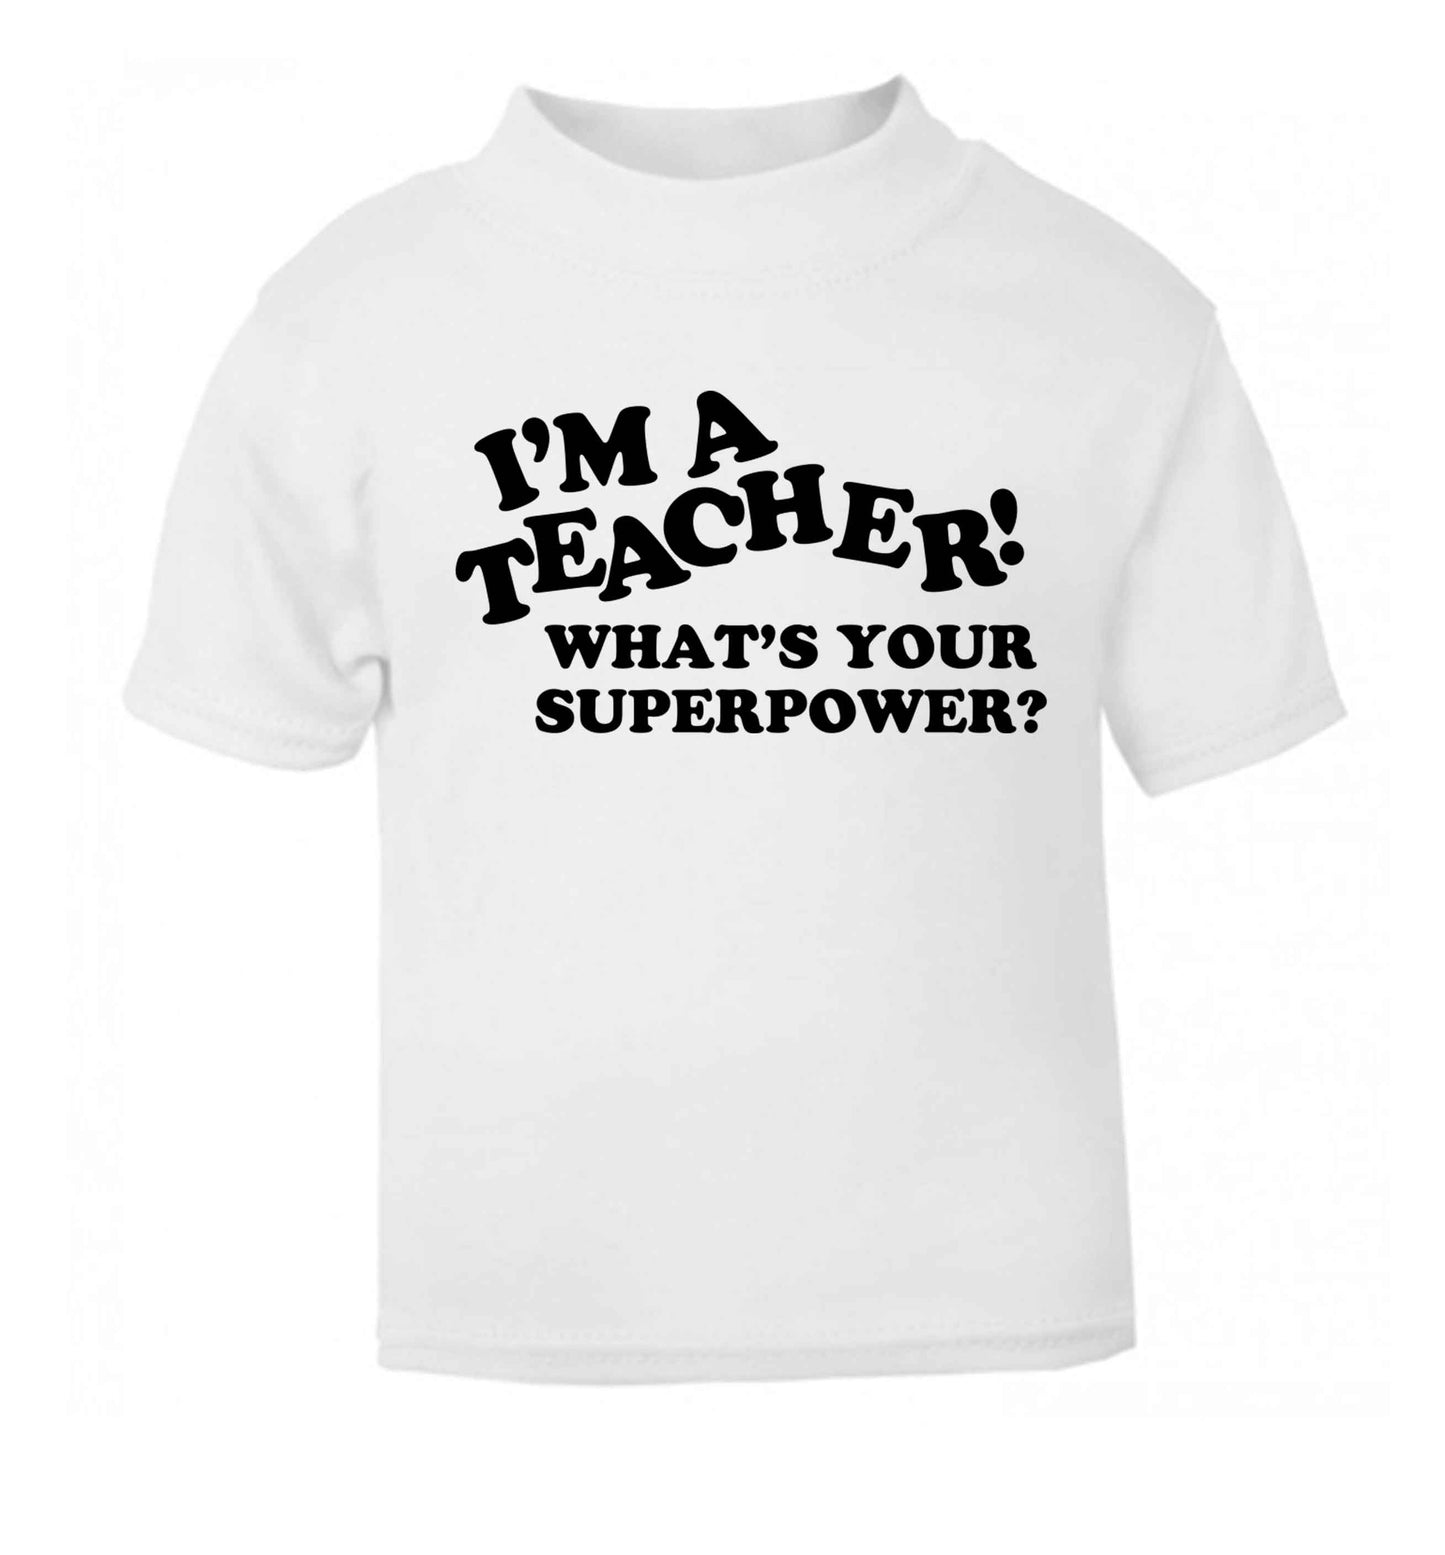 I'm a teacher what's your superpower?! white baby toddler Tshirt 2 Years